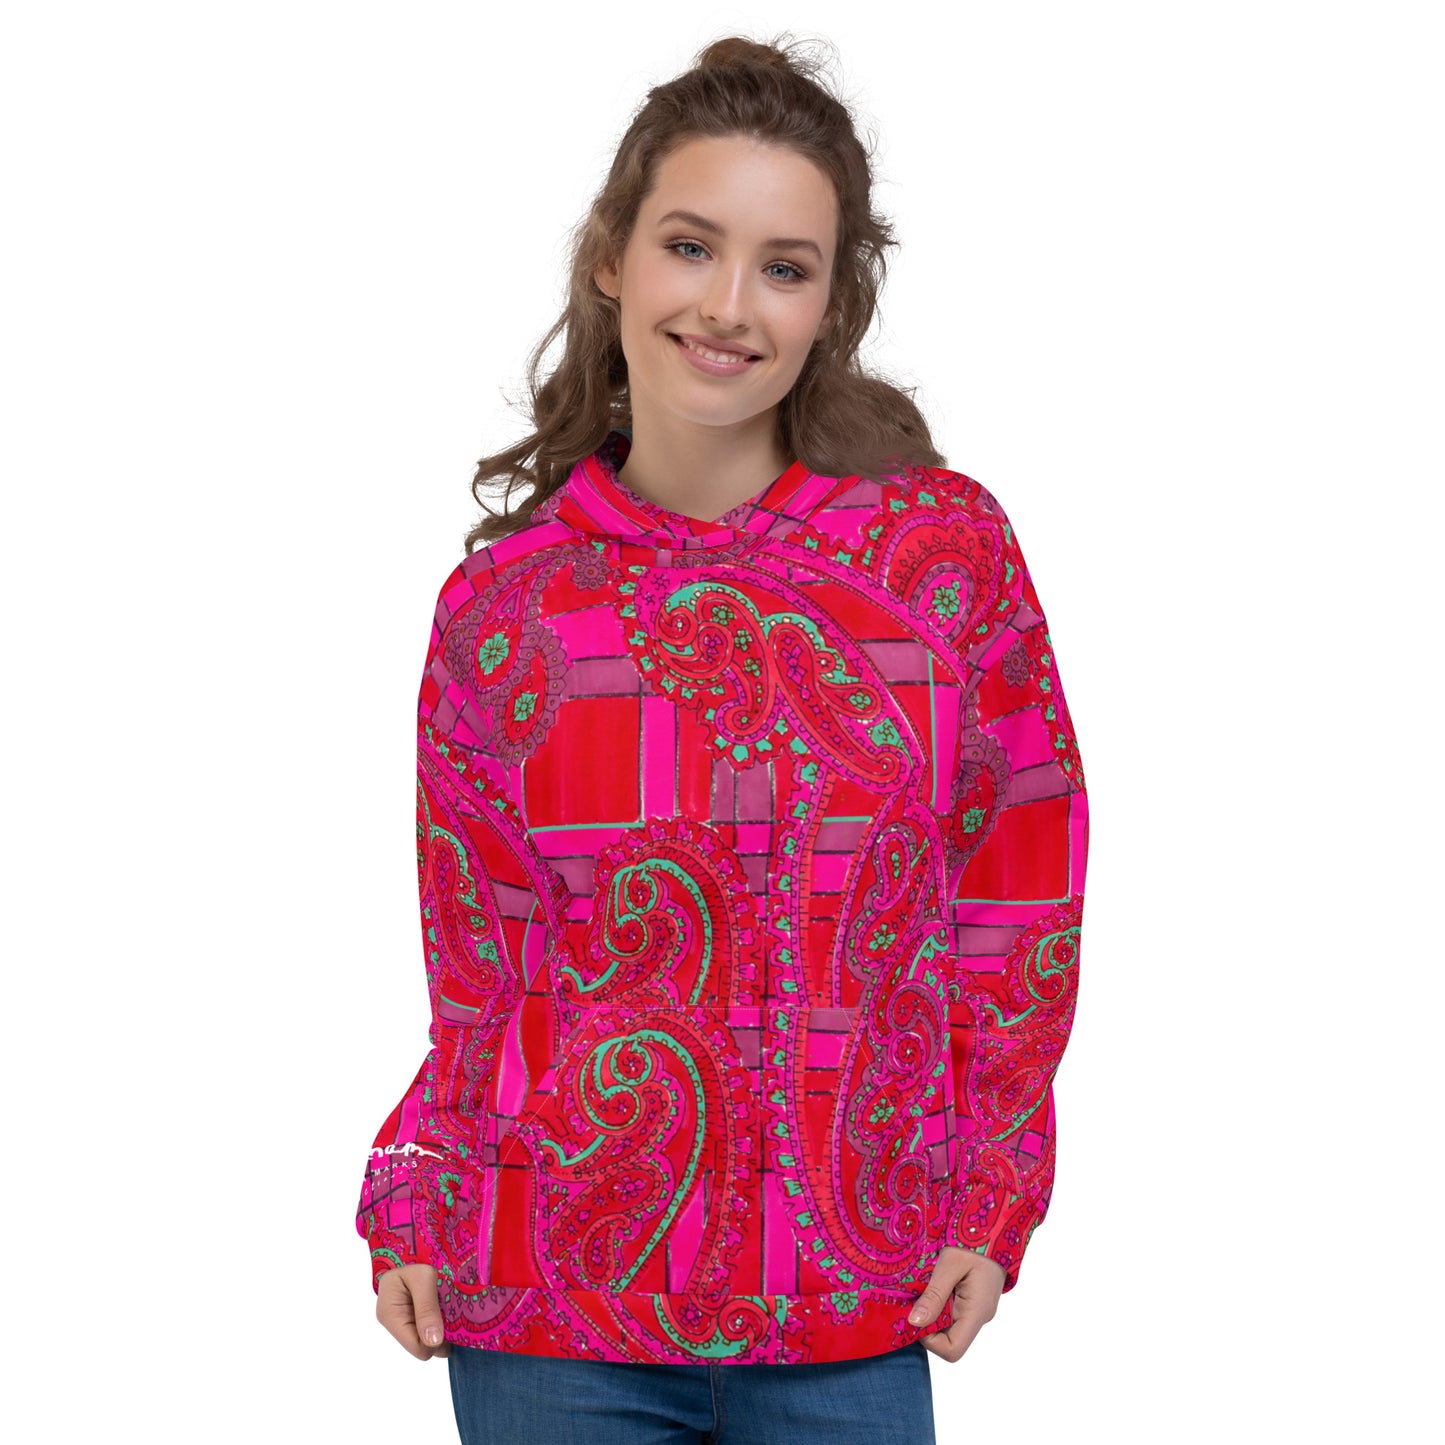 Recycled Unisex Hoodie - Bright Fuscia and Red Poppy Paisley on Plaid - Women